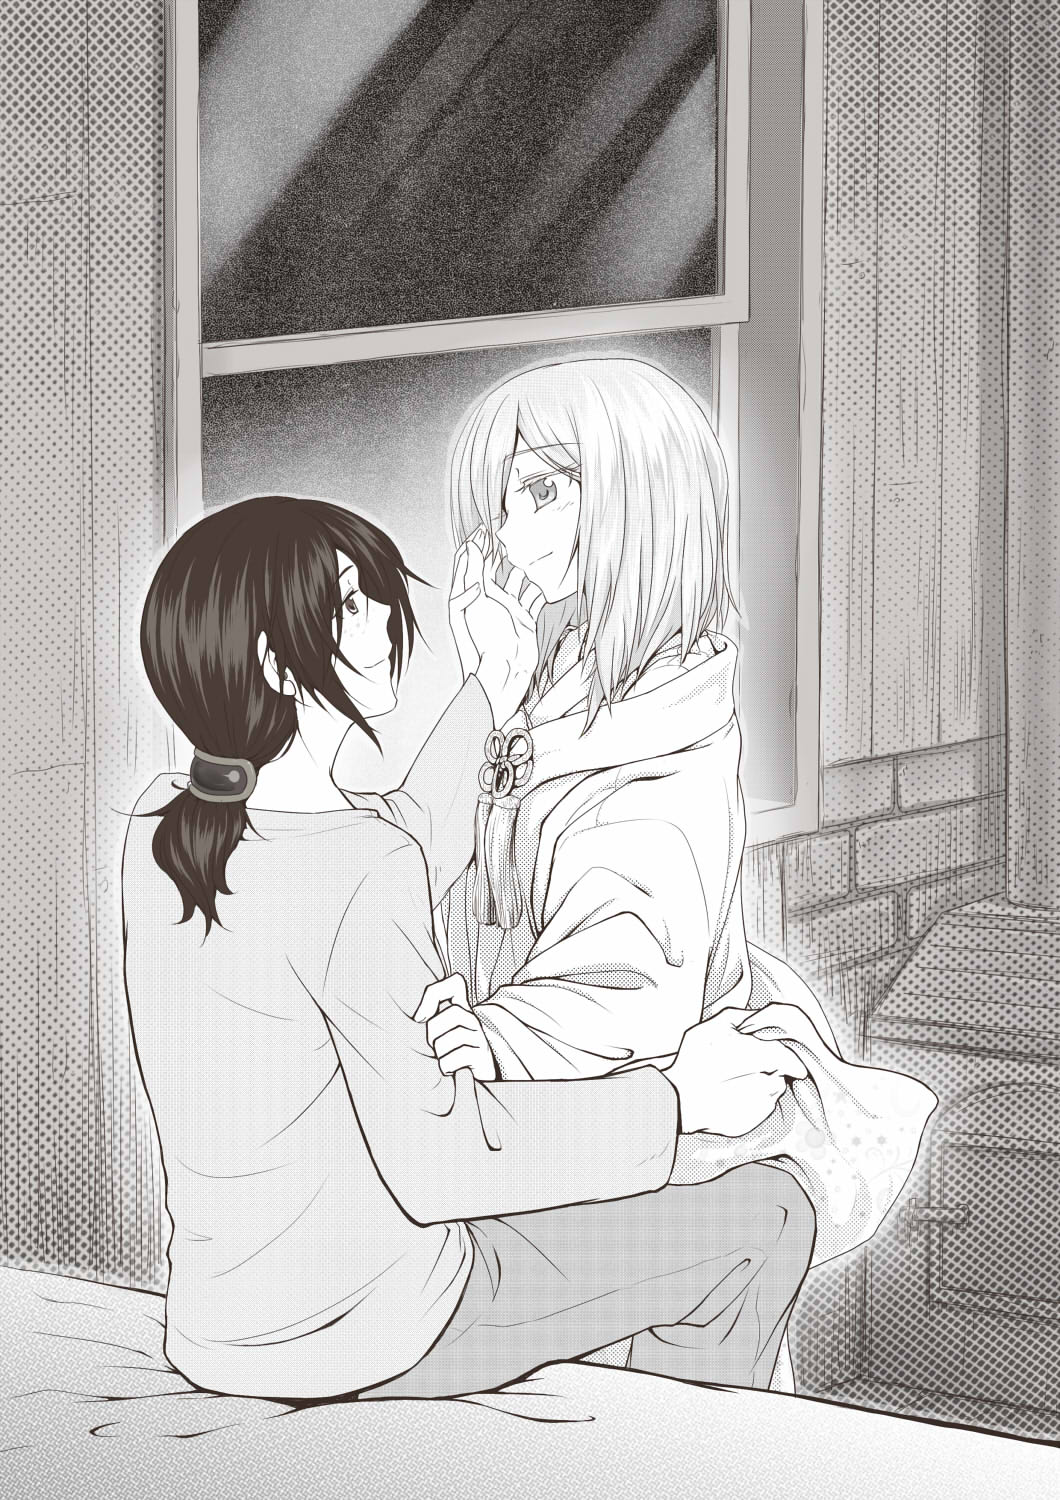 2girls casual christa_renz clothes_grab freckles highres holding_hands leo_19th looking_at_another monochrome multiple_girls pants ponytail shingeki_no_kyojin short_hair sitting sitting_on_bed touching window ymir_(shingeki_no_kyojin)